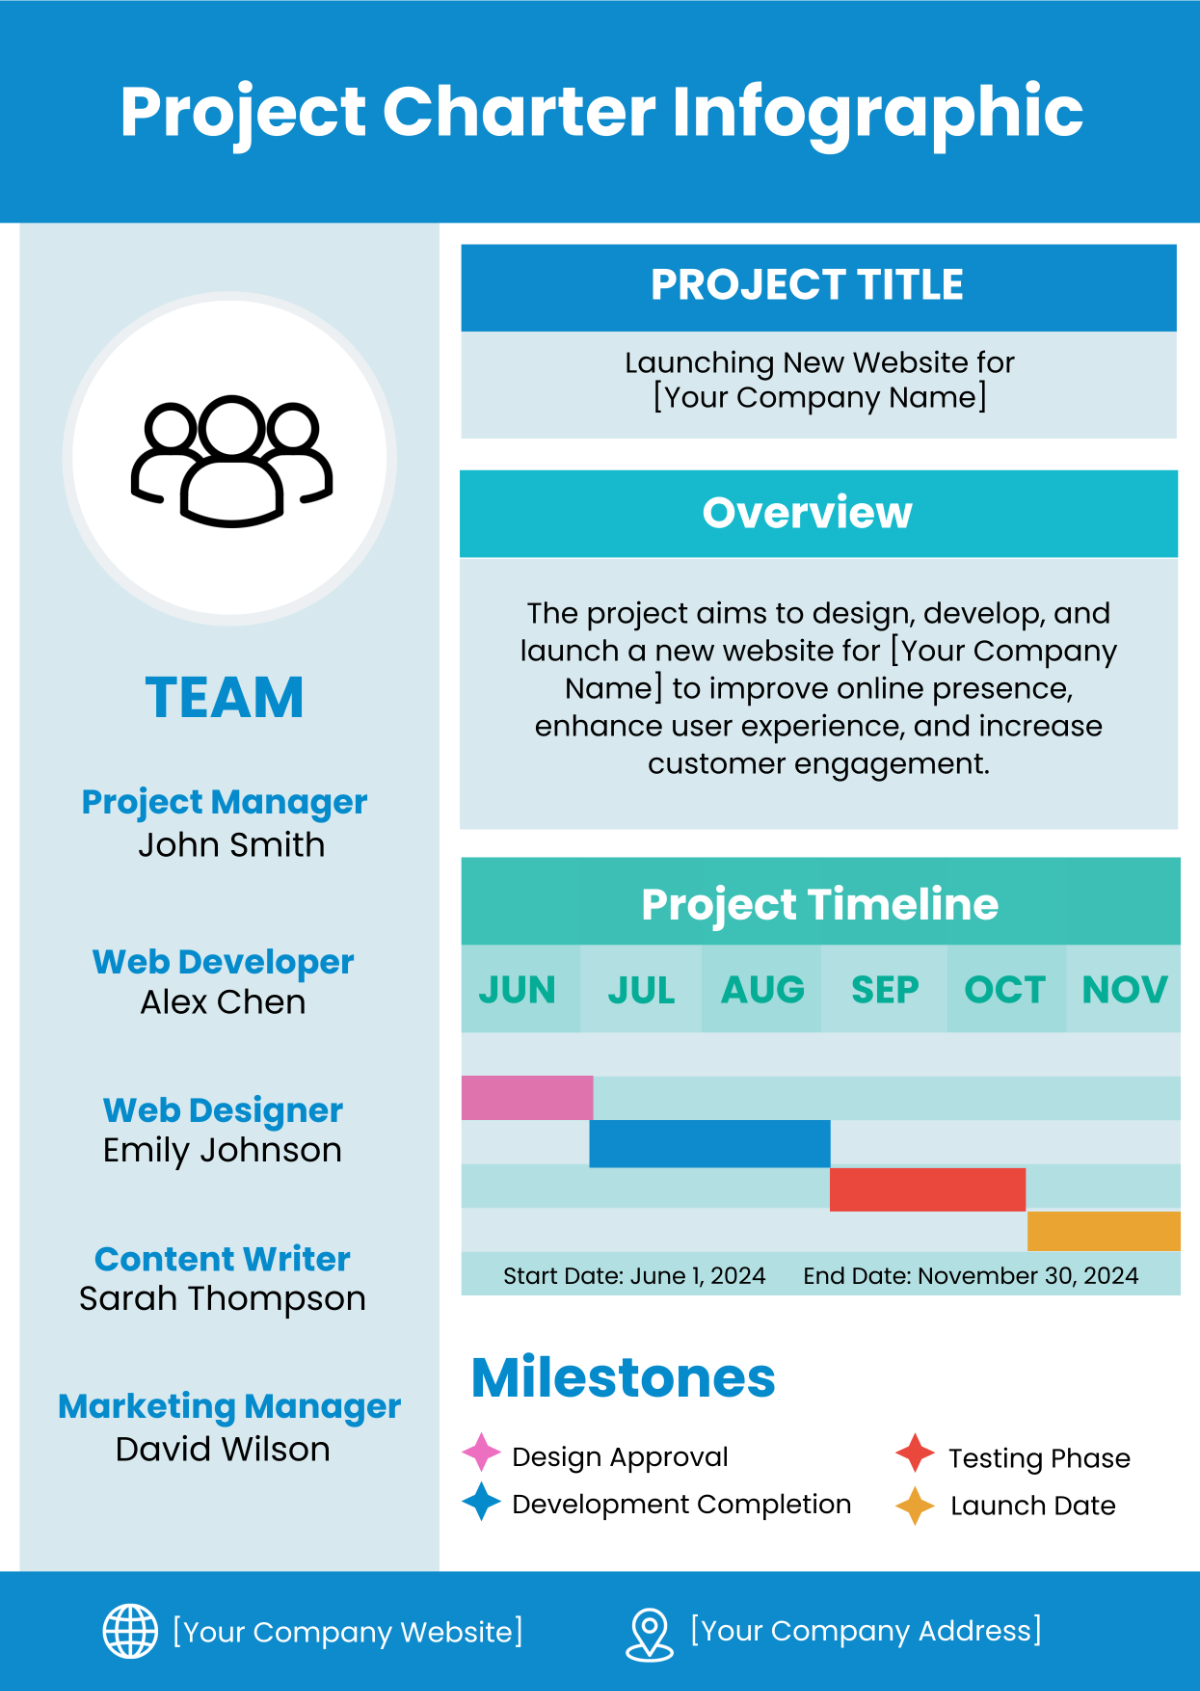 Project Charter Infographic